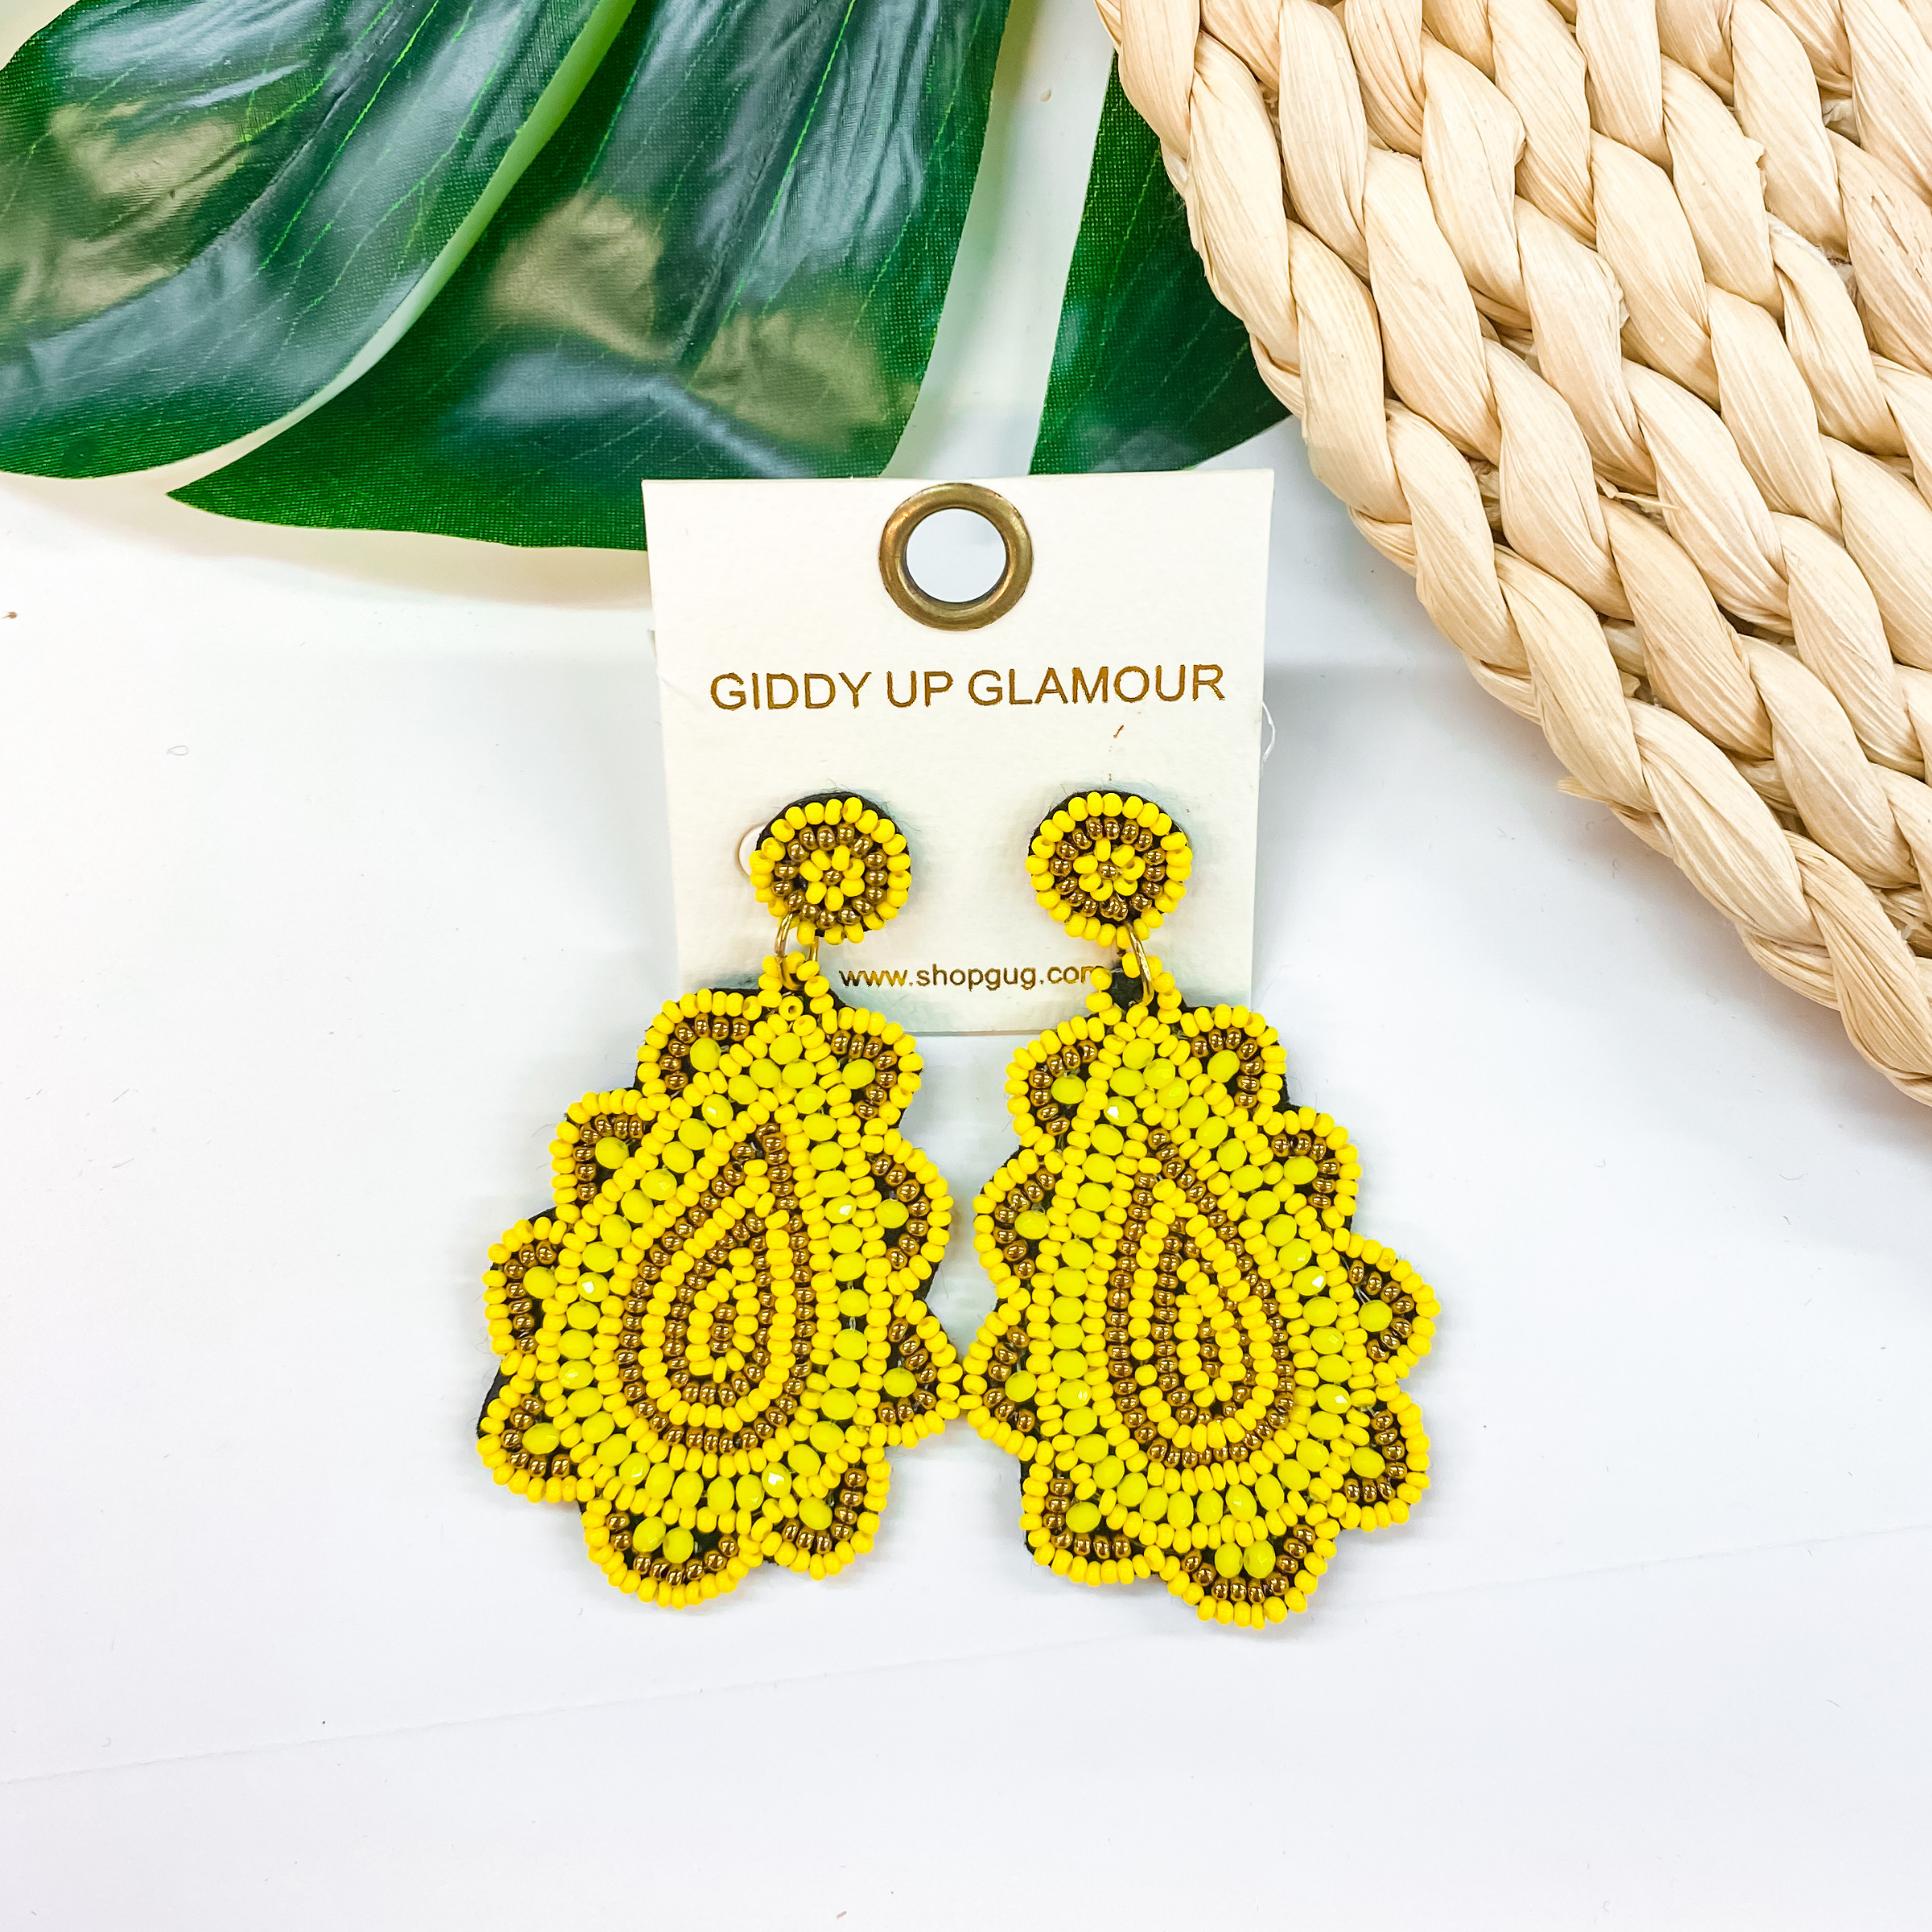 Light Up The Night Seed Bead Teardrop Earrings in Yellow - Giddy Up Glamour Boutique